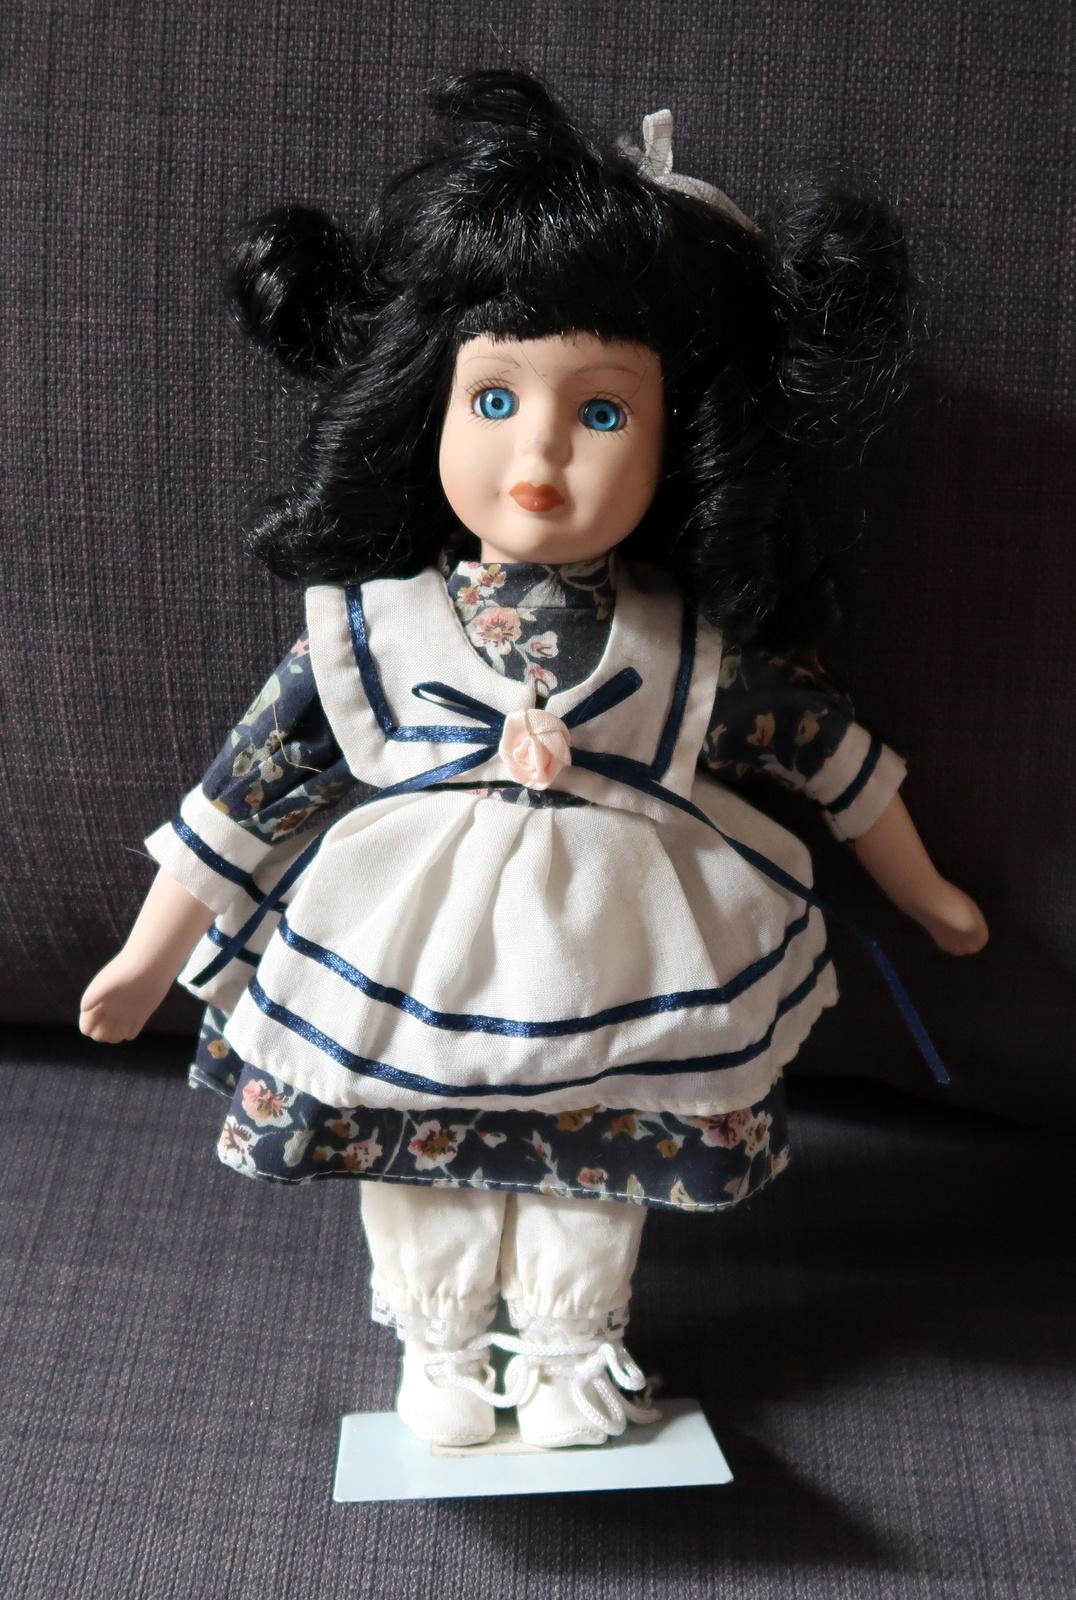 Immerse yourself in the charm of a bygone era with this Vintage Porcelain Doll, a delicate beauty hailing from the middle of the 20th century. Adorned in a white and blue dress, with striking black hair and captivating blue eyes, this doll is a